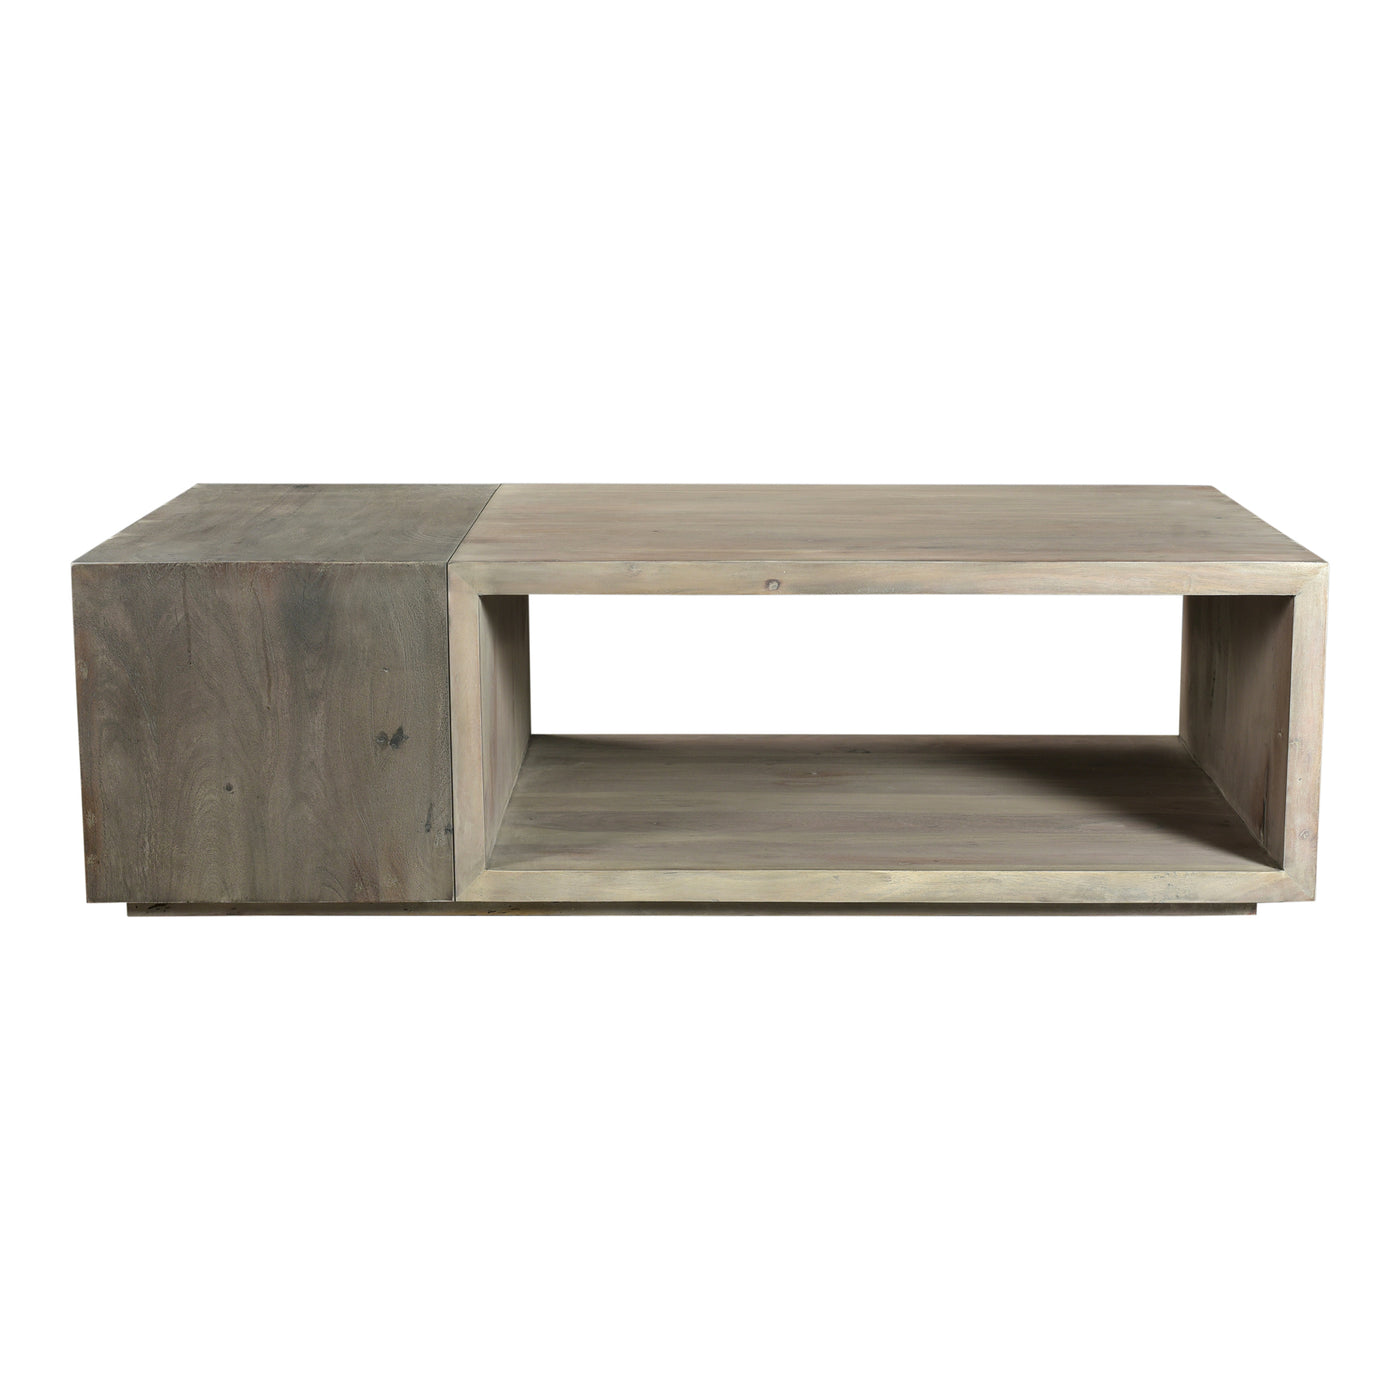 The Timtam Coffee Table features a plethora of storage options to keep your living room clean and organized. Made from sol...